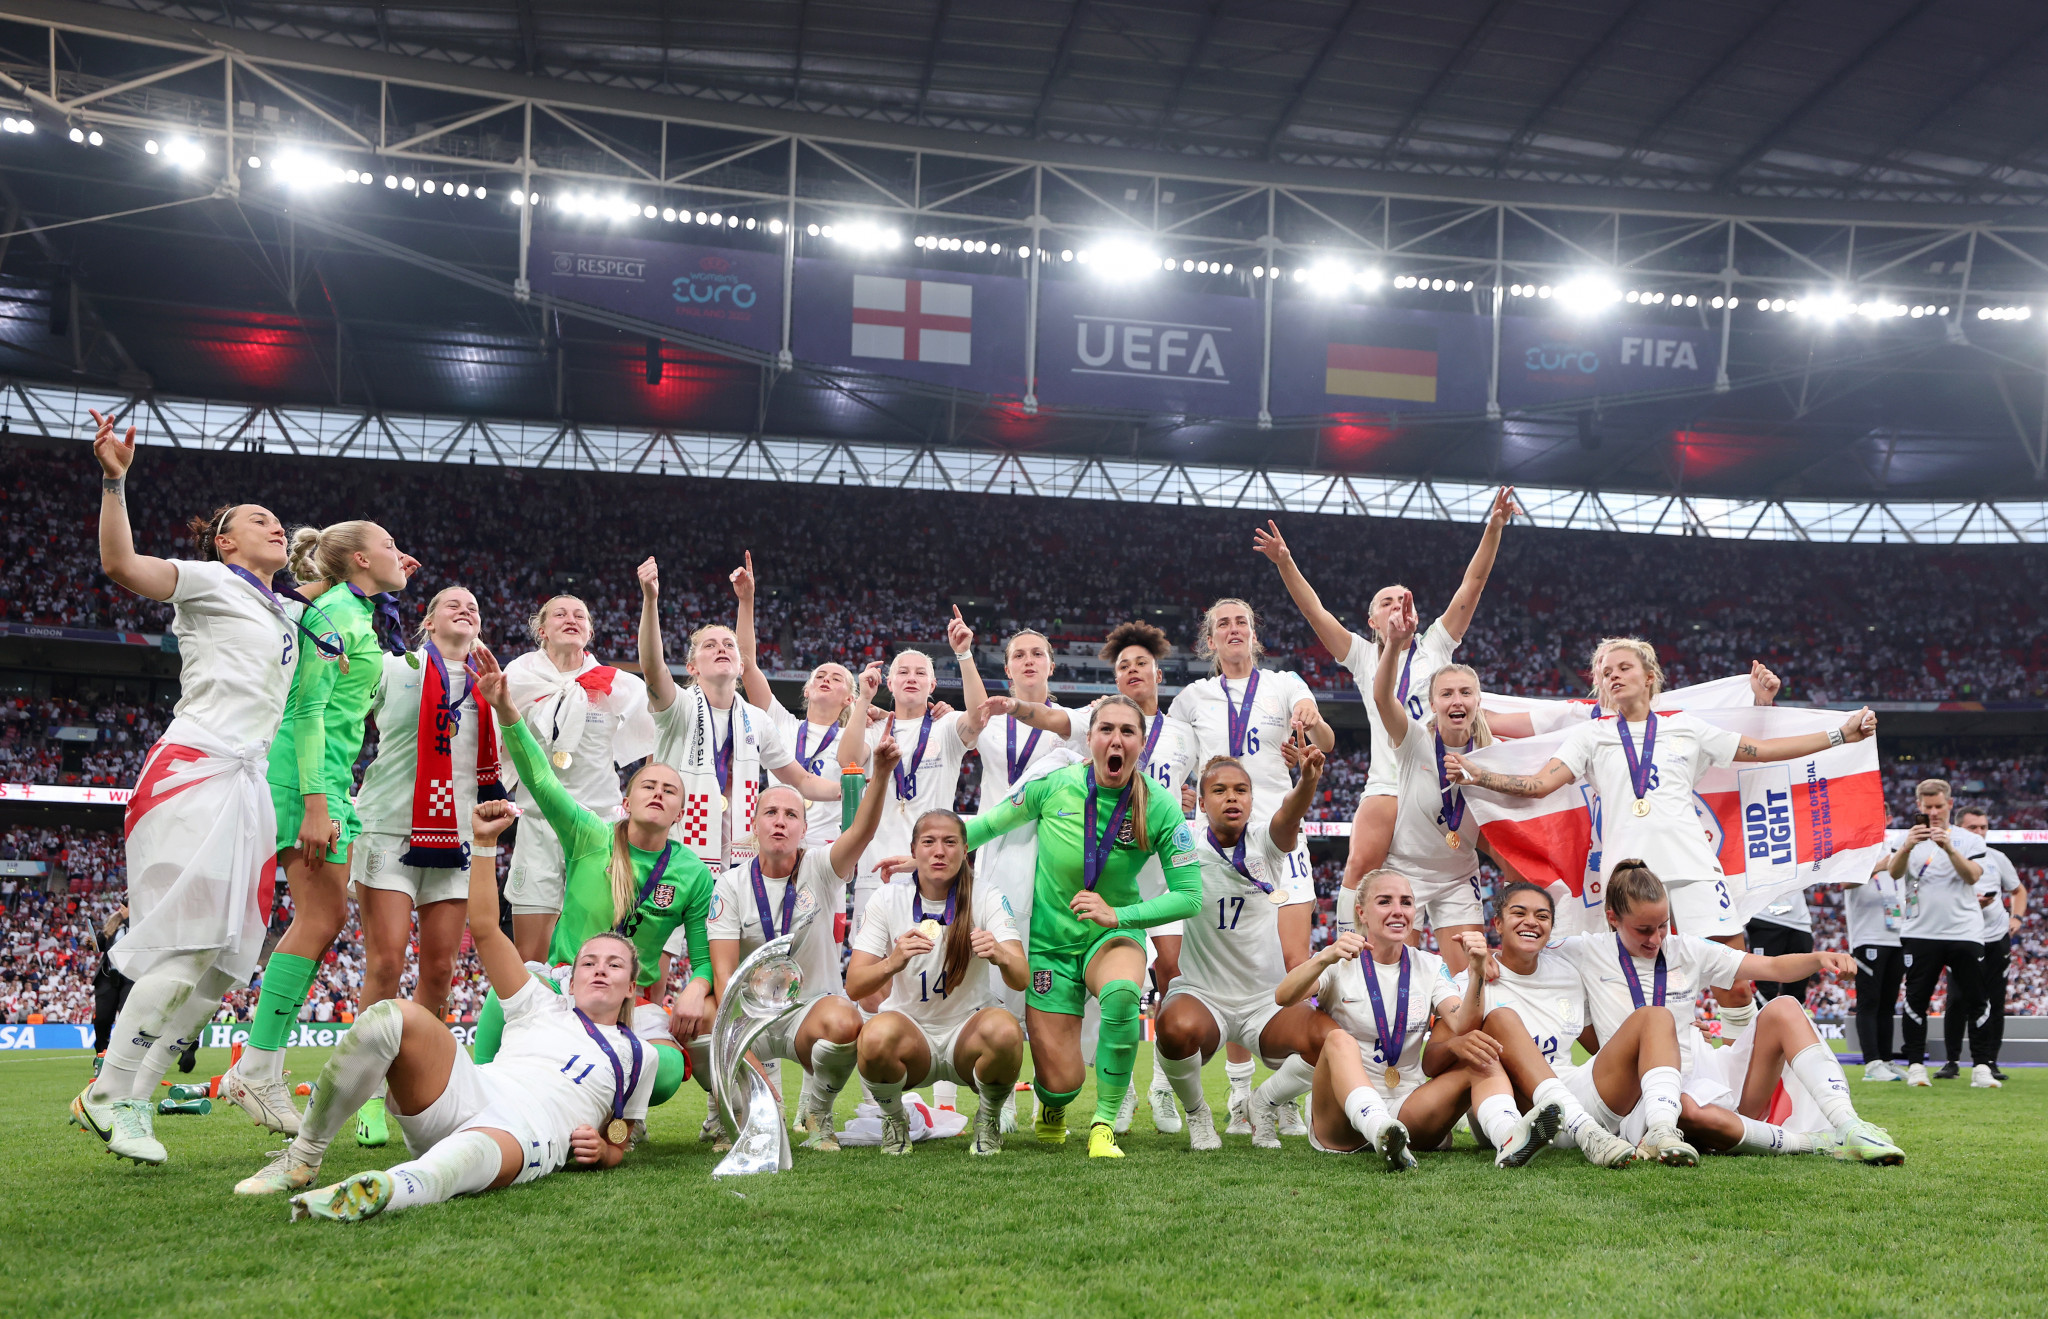 England beat Germany 2-1 to win the UEFA Women's Euro 2022 at Wembley ©Getty Images